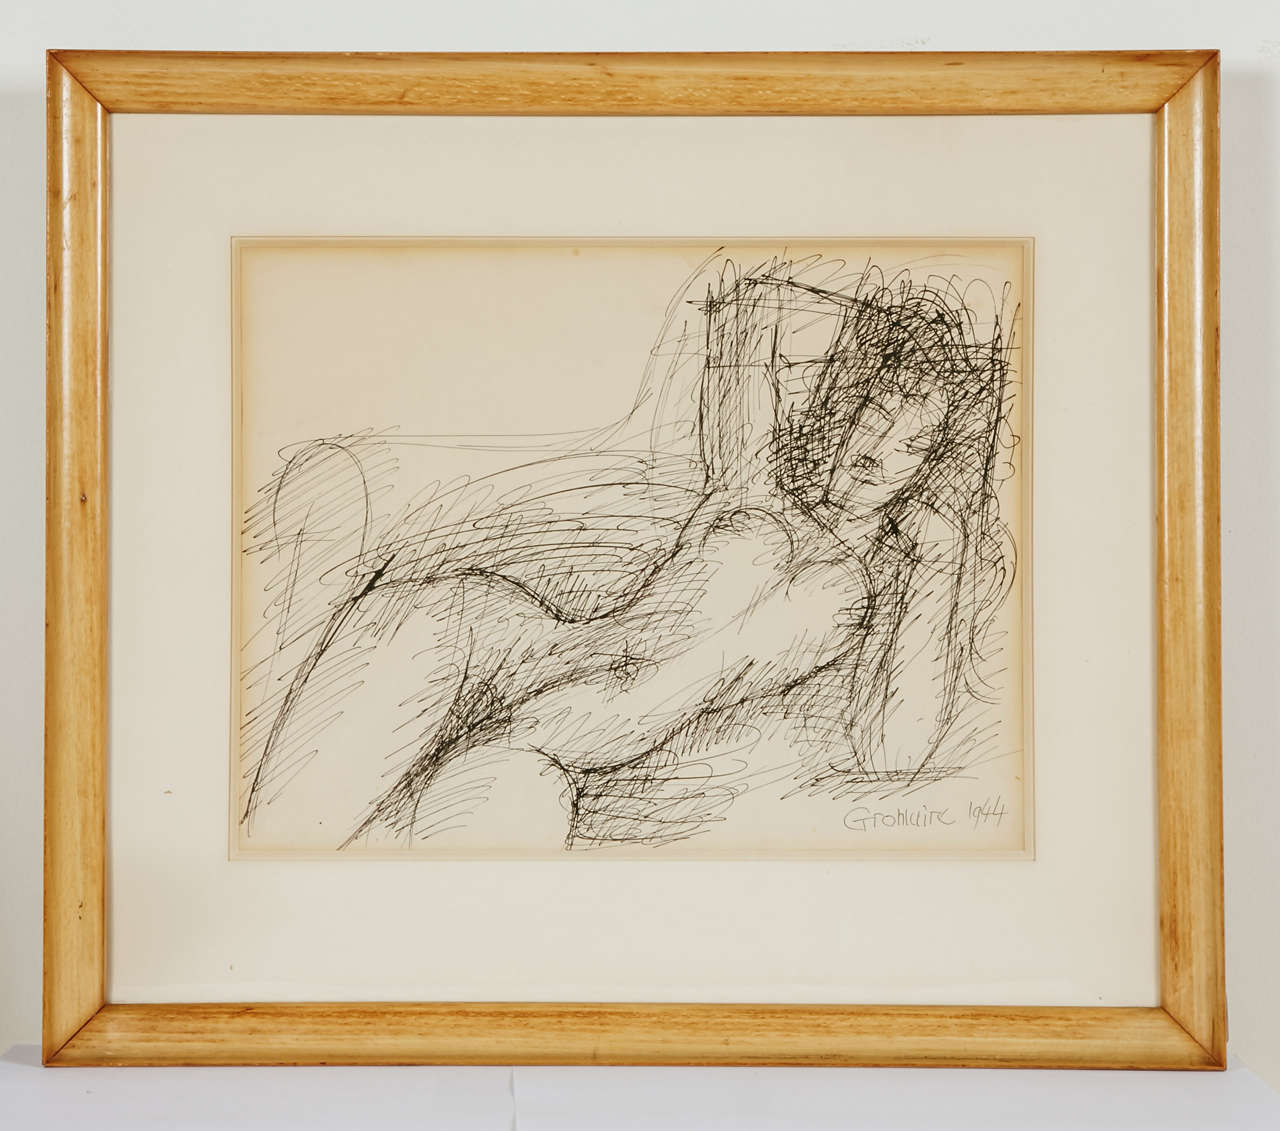 Drawing by Marcel Gromaire (1892 - 1971). Ink drawing signed 'Gromaire 1944' on the bottom right.

Dimensions with frame: 48cm x 41cm.
Dimension of the visible drawing: 33cm x 25cm.